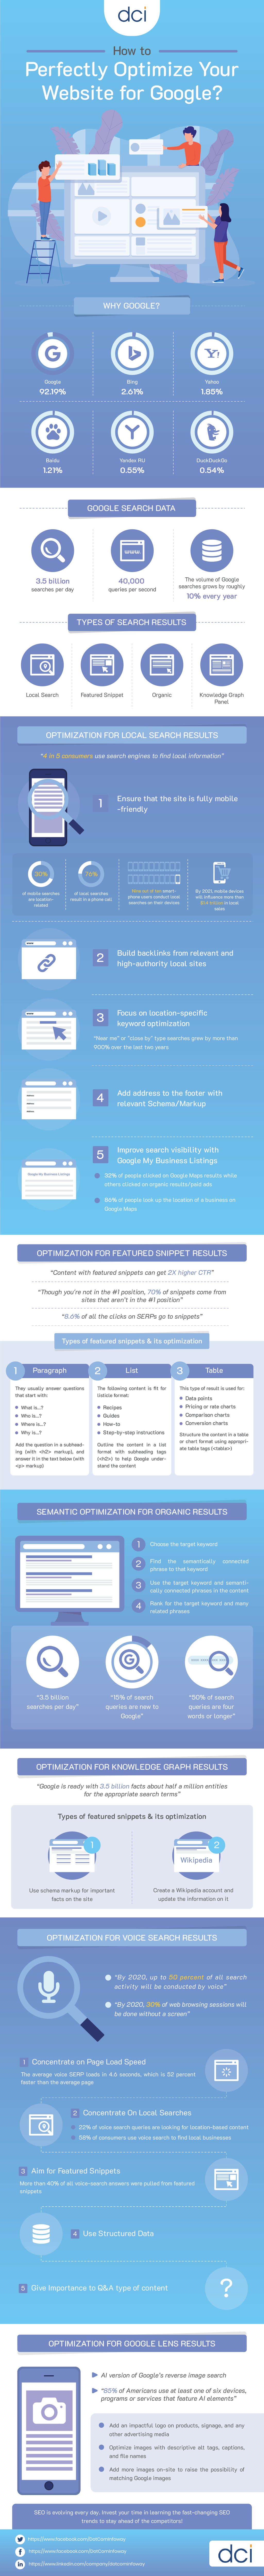 How to Perfectly Optimize Your Website for Google